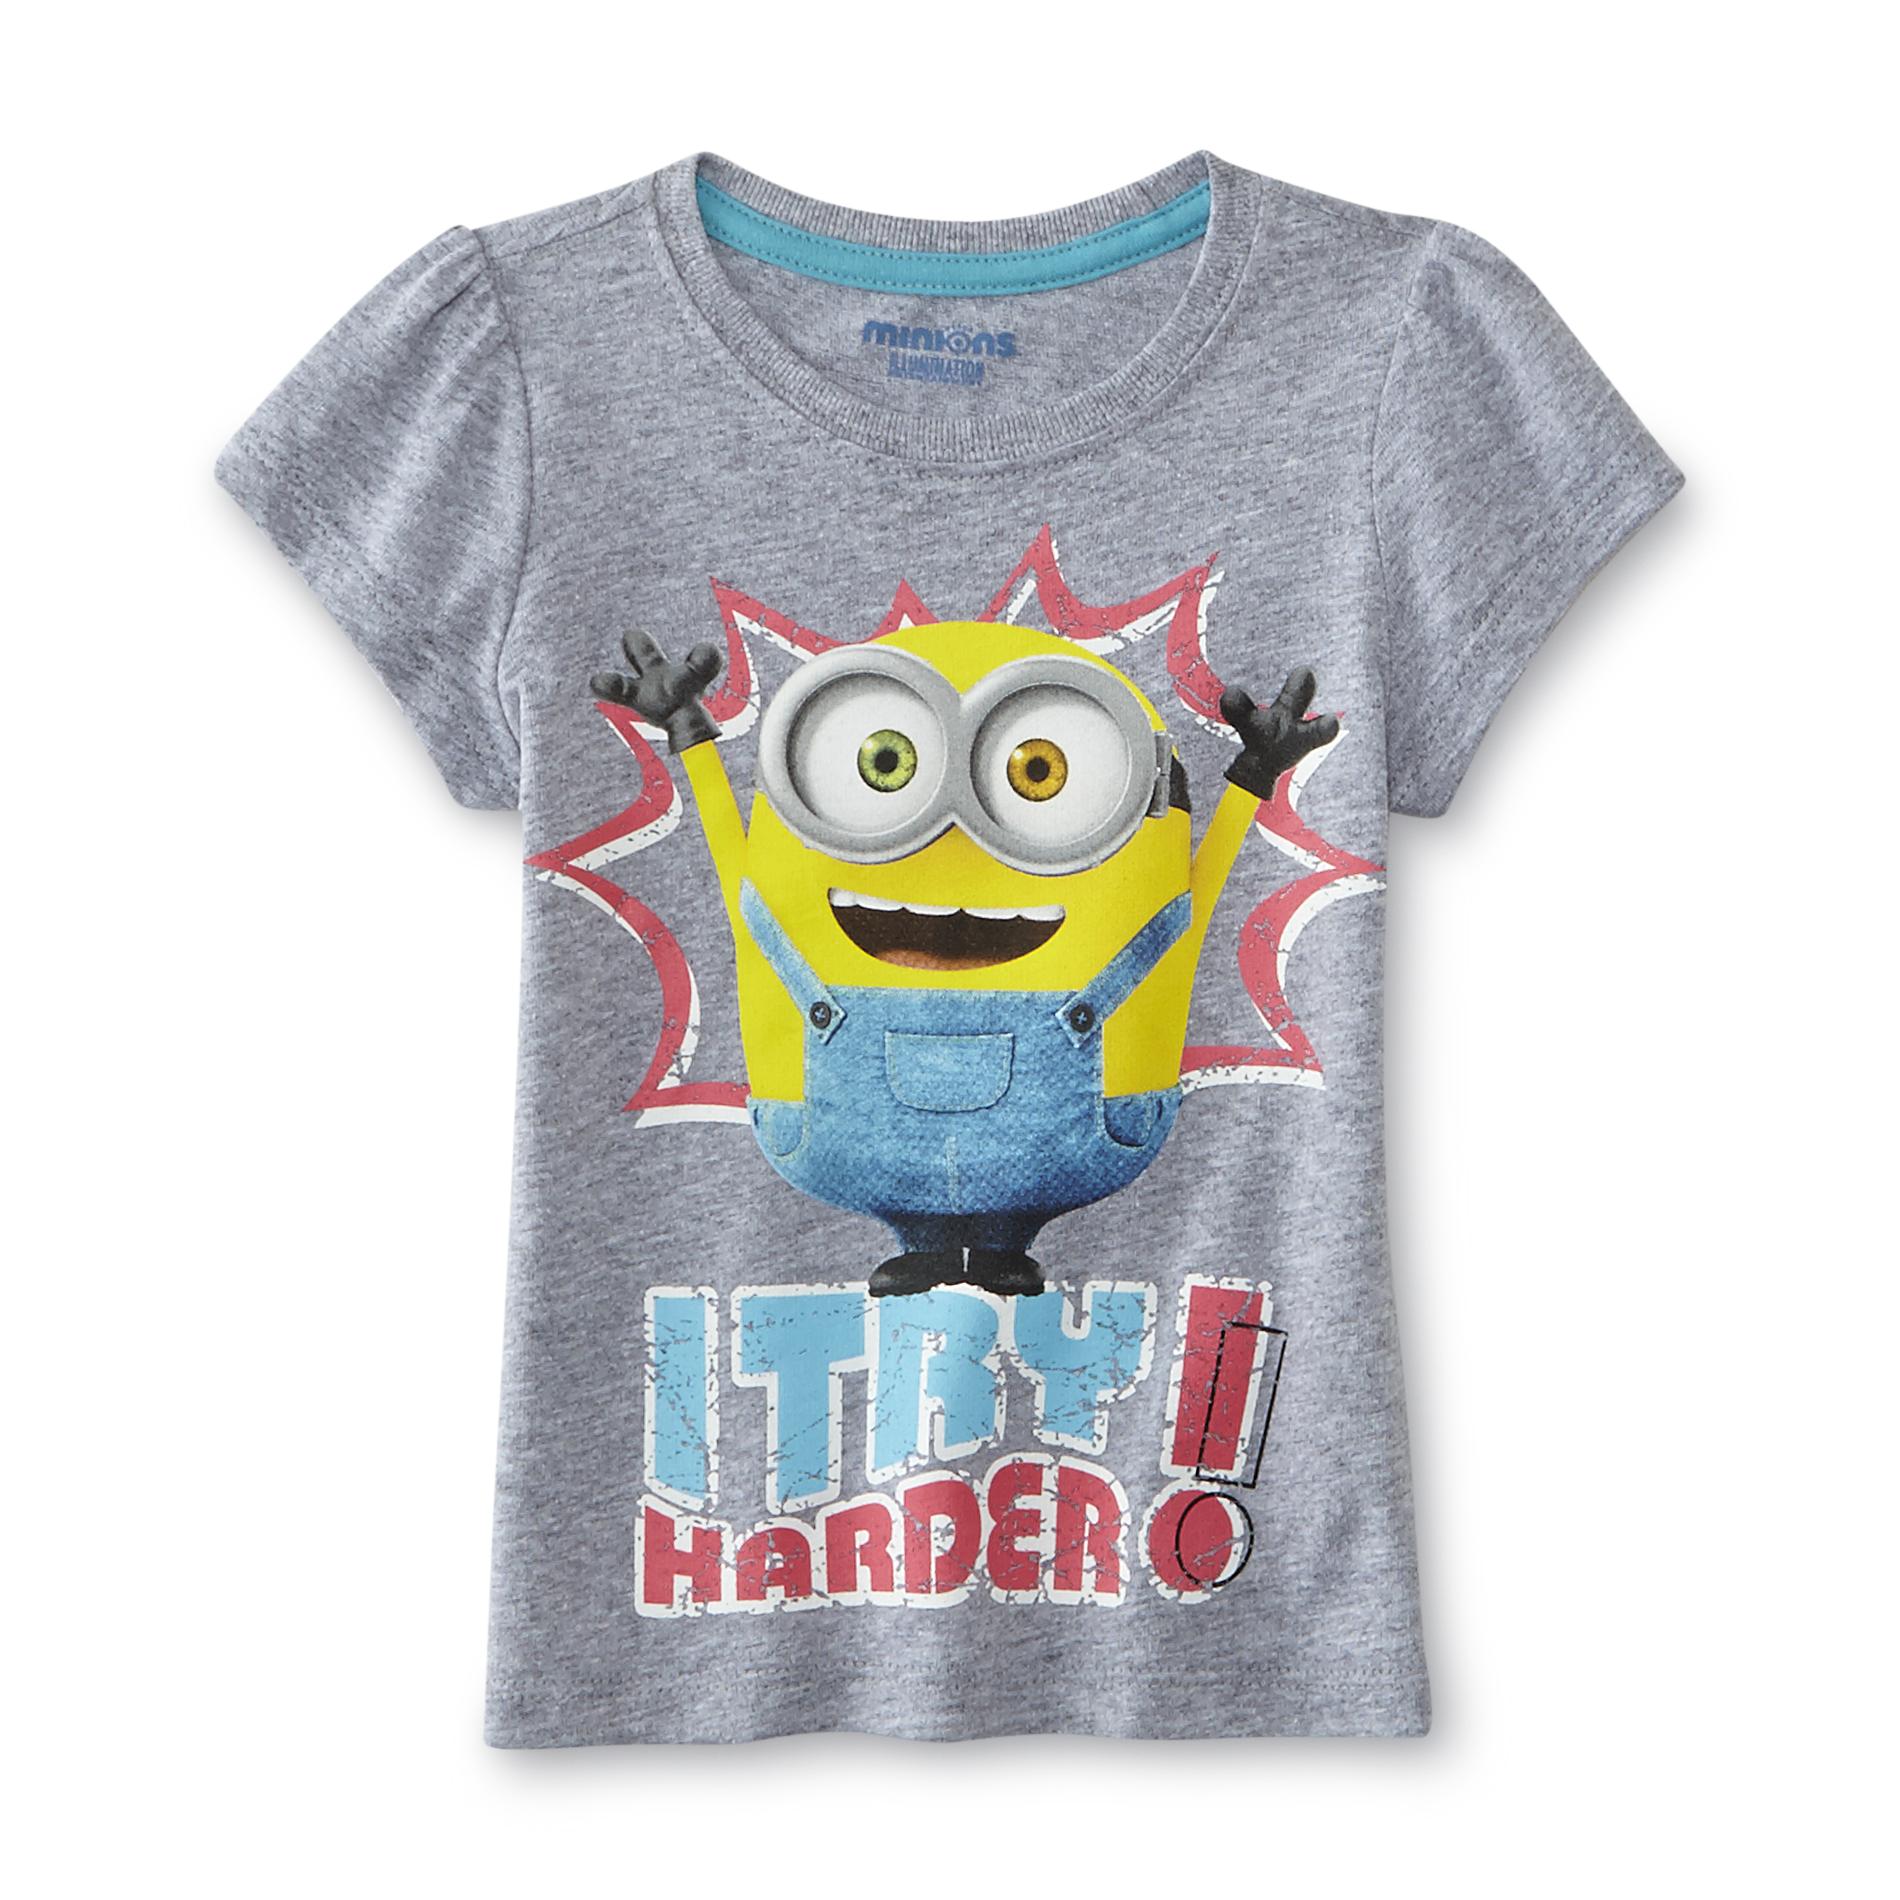 Toddler Girl's Graphic T-Shirt